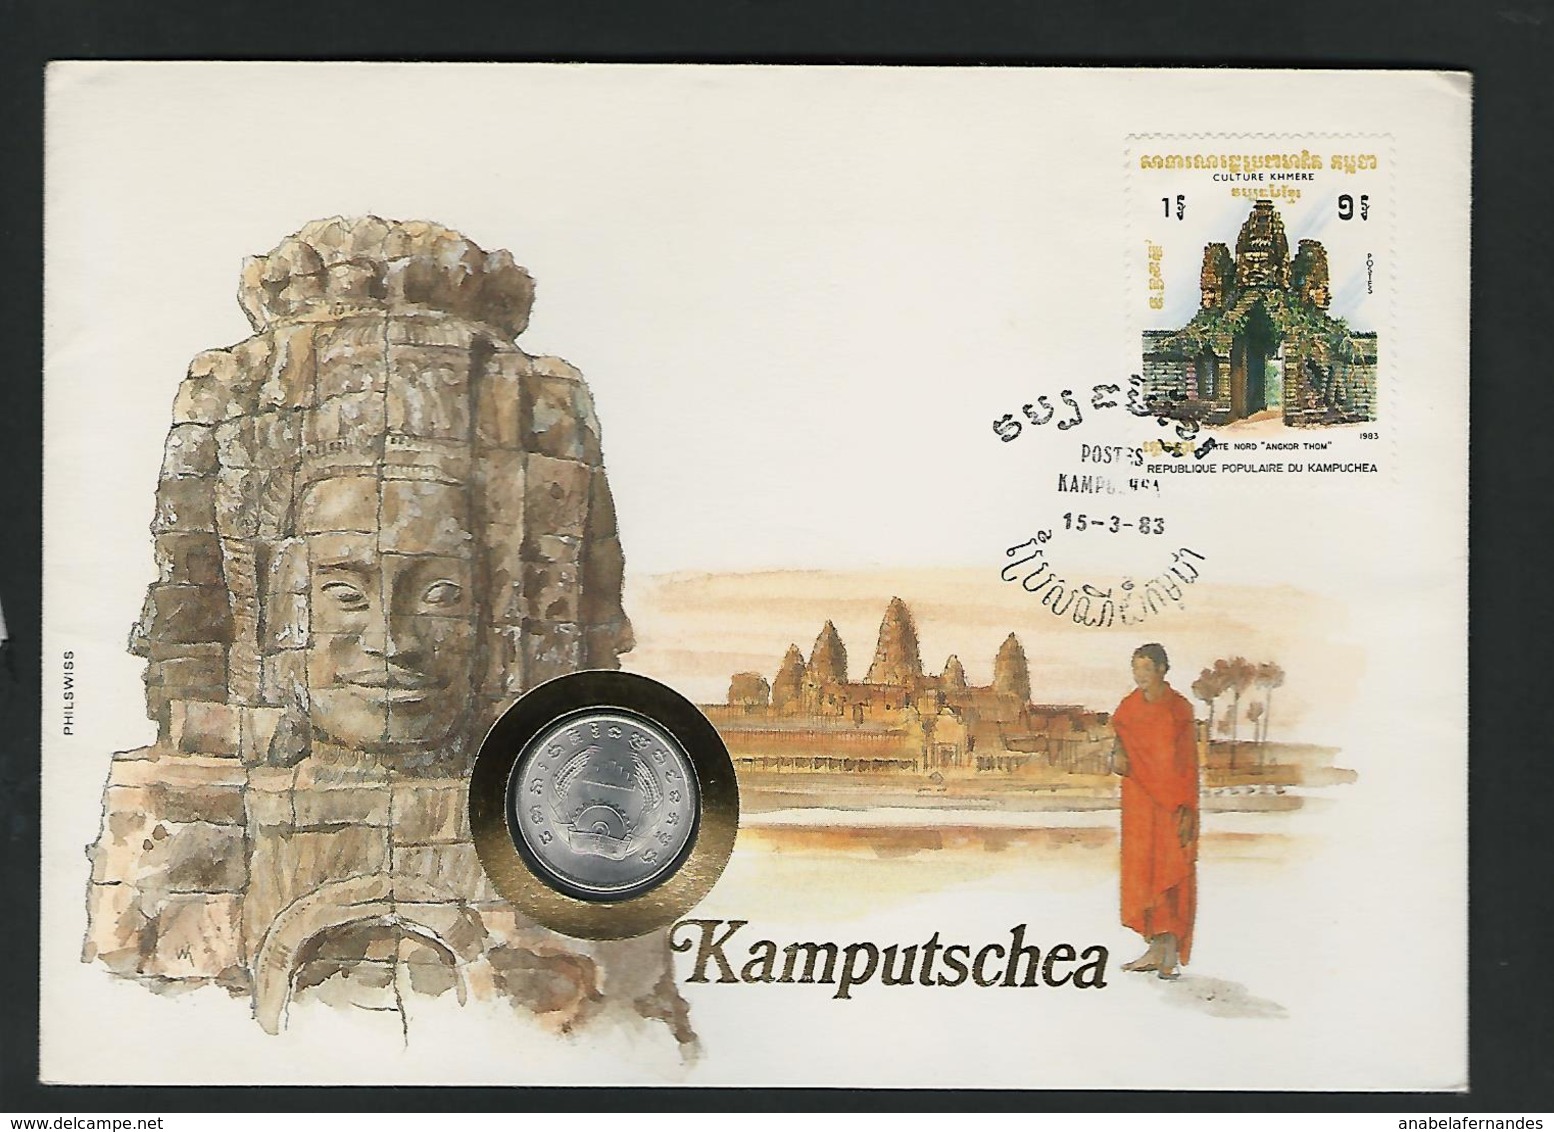 KAMPUTSCHEA - 5 CENTAVOS1979  / /  STAMP - COVER - COIN  / / PHILSWISS 1983 - Cambodia